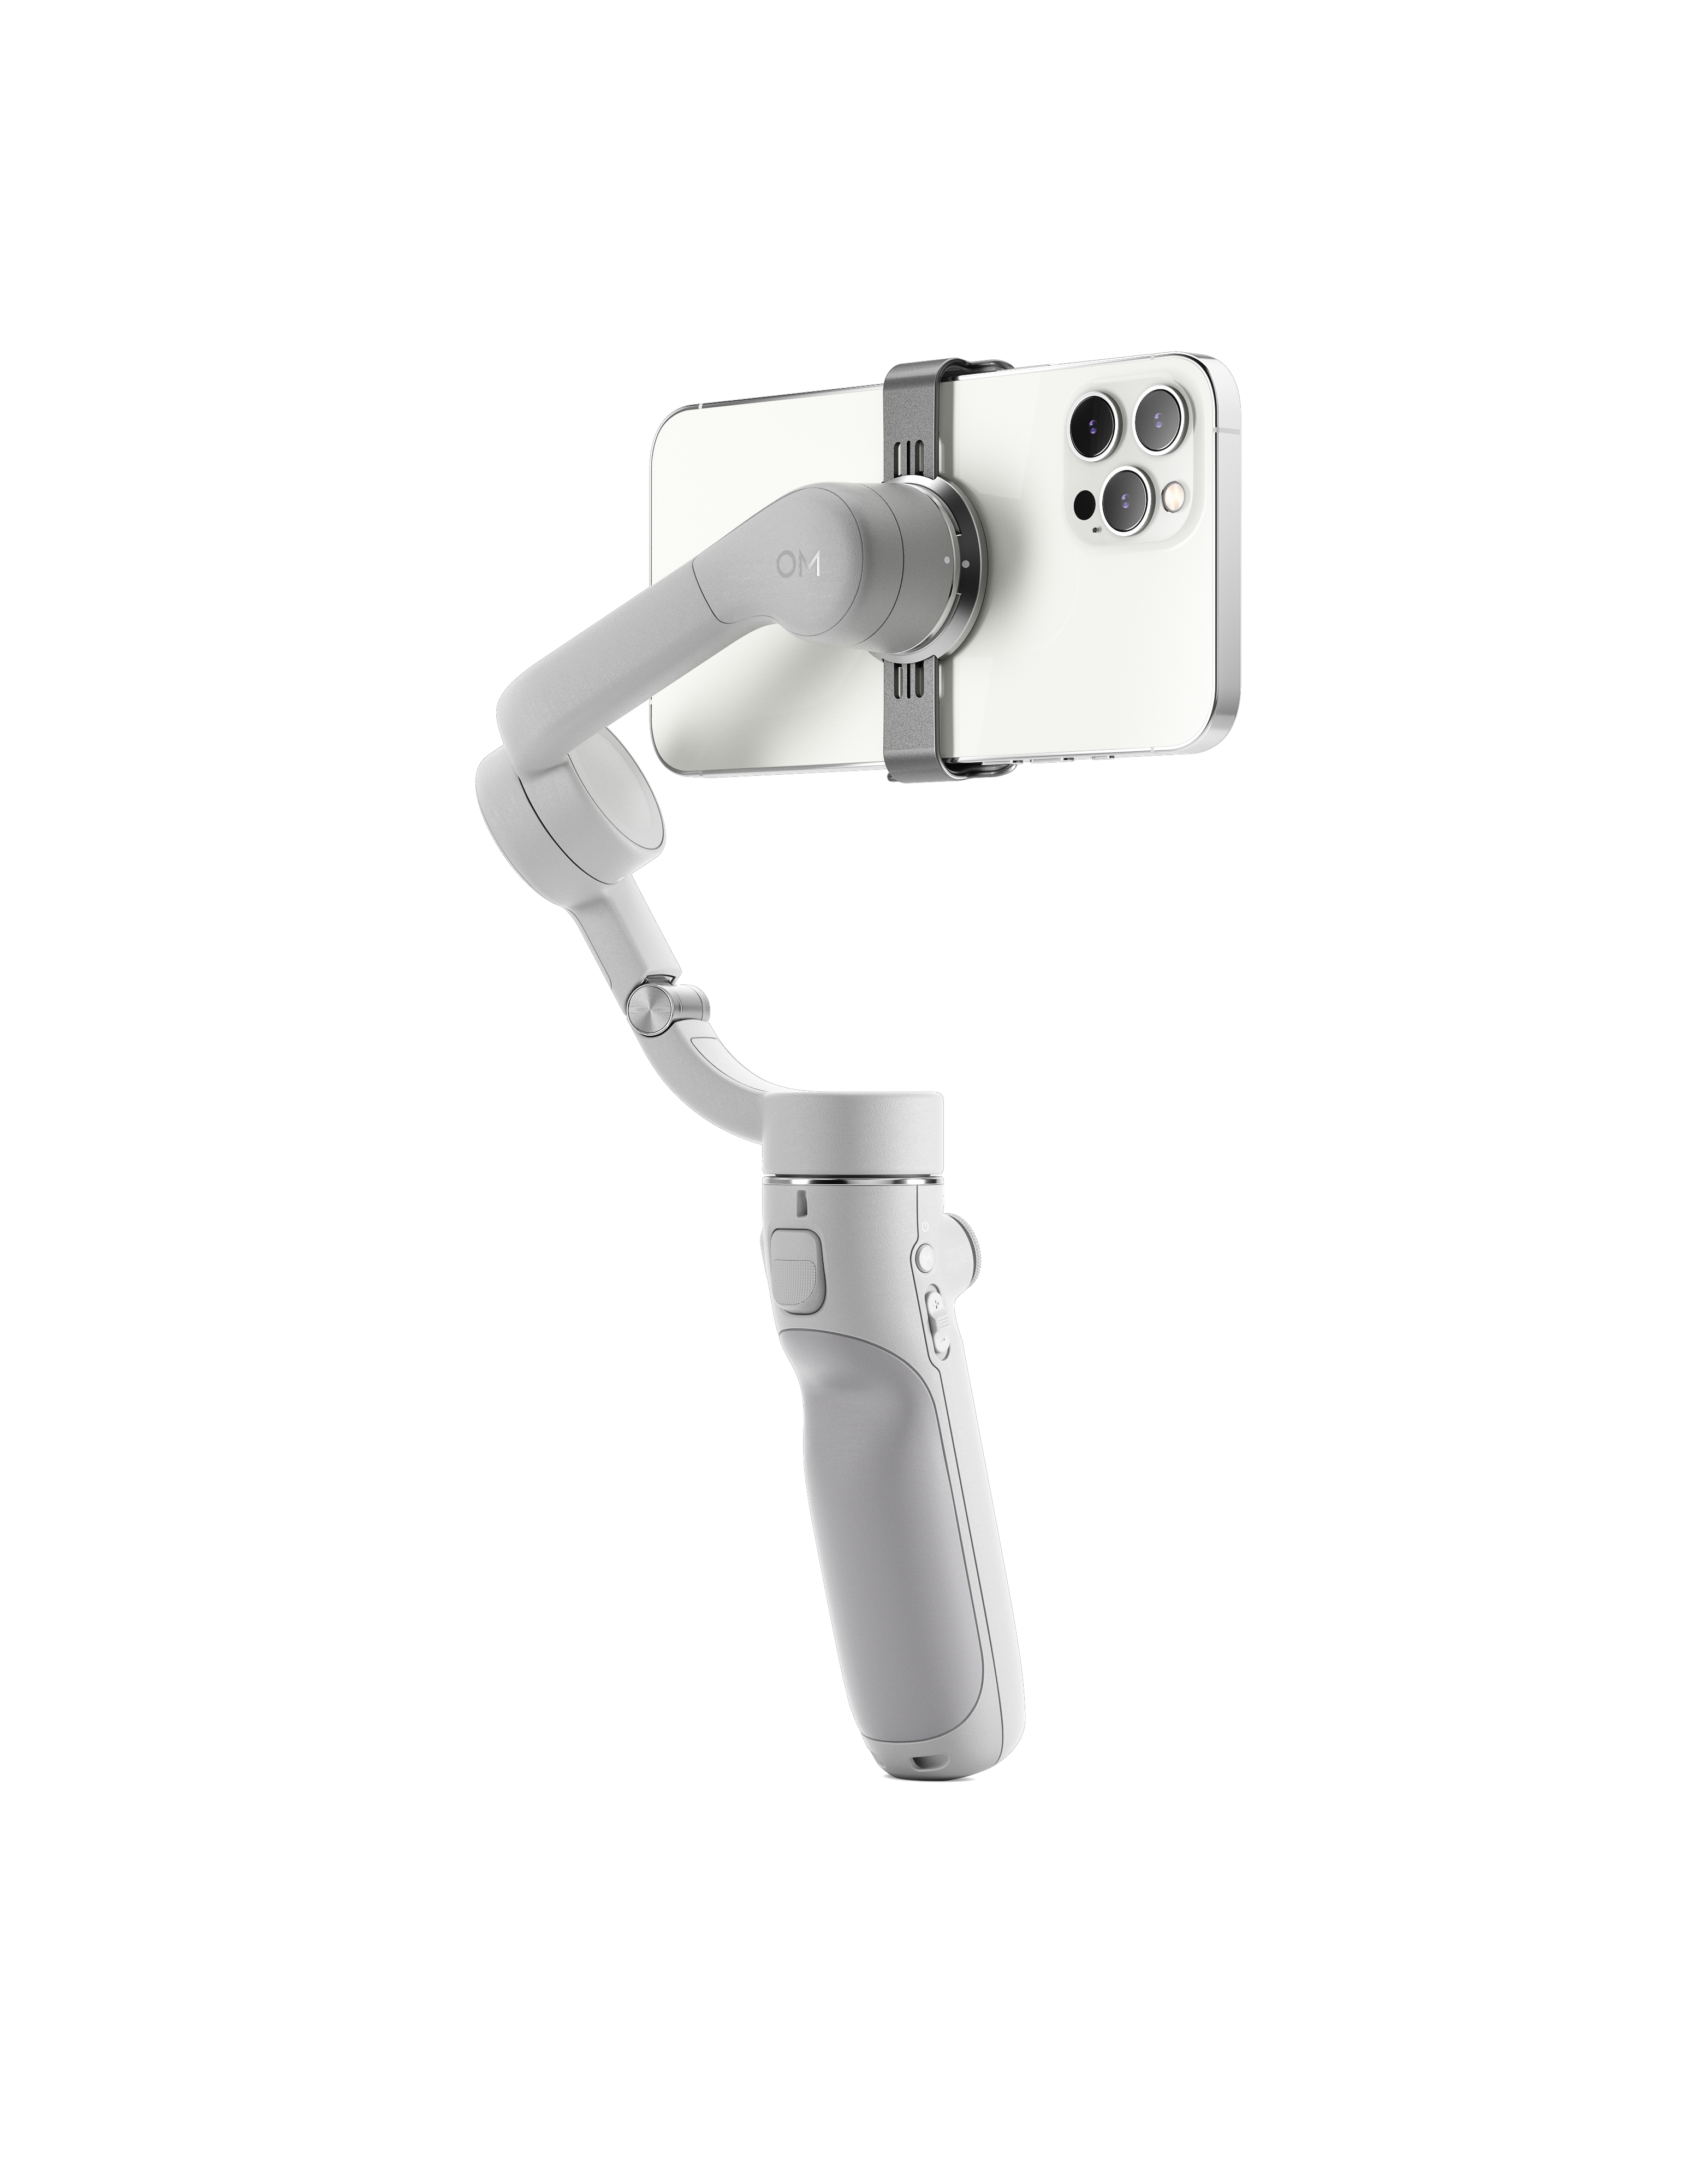 DJI OM 5 is a selfie stick and a smartphone gimbal in one, comes 